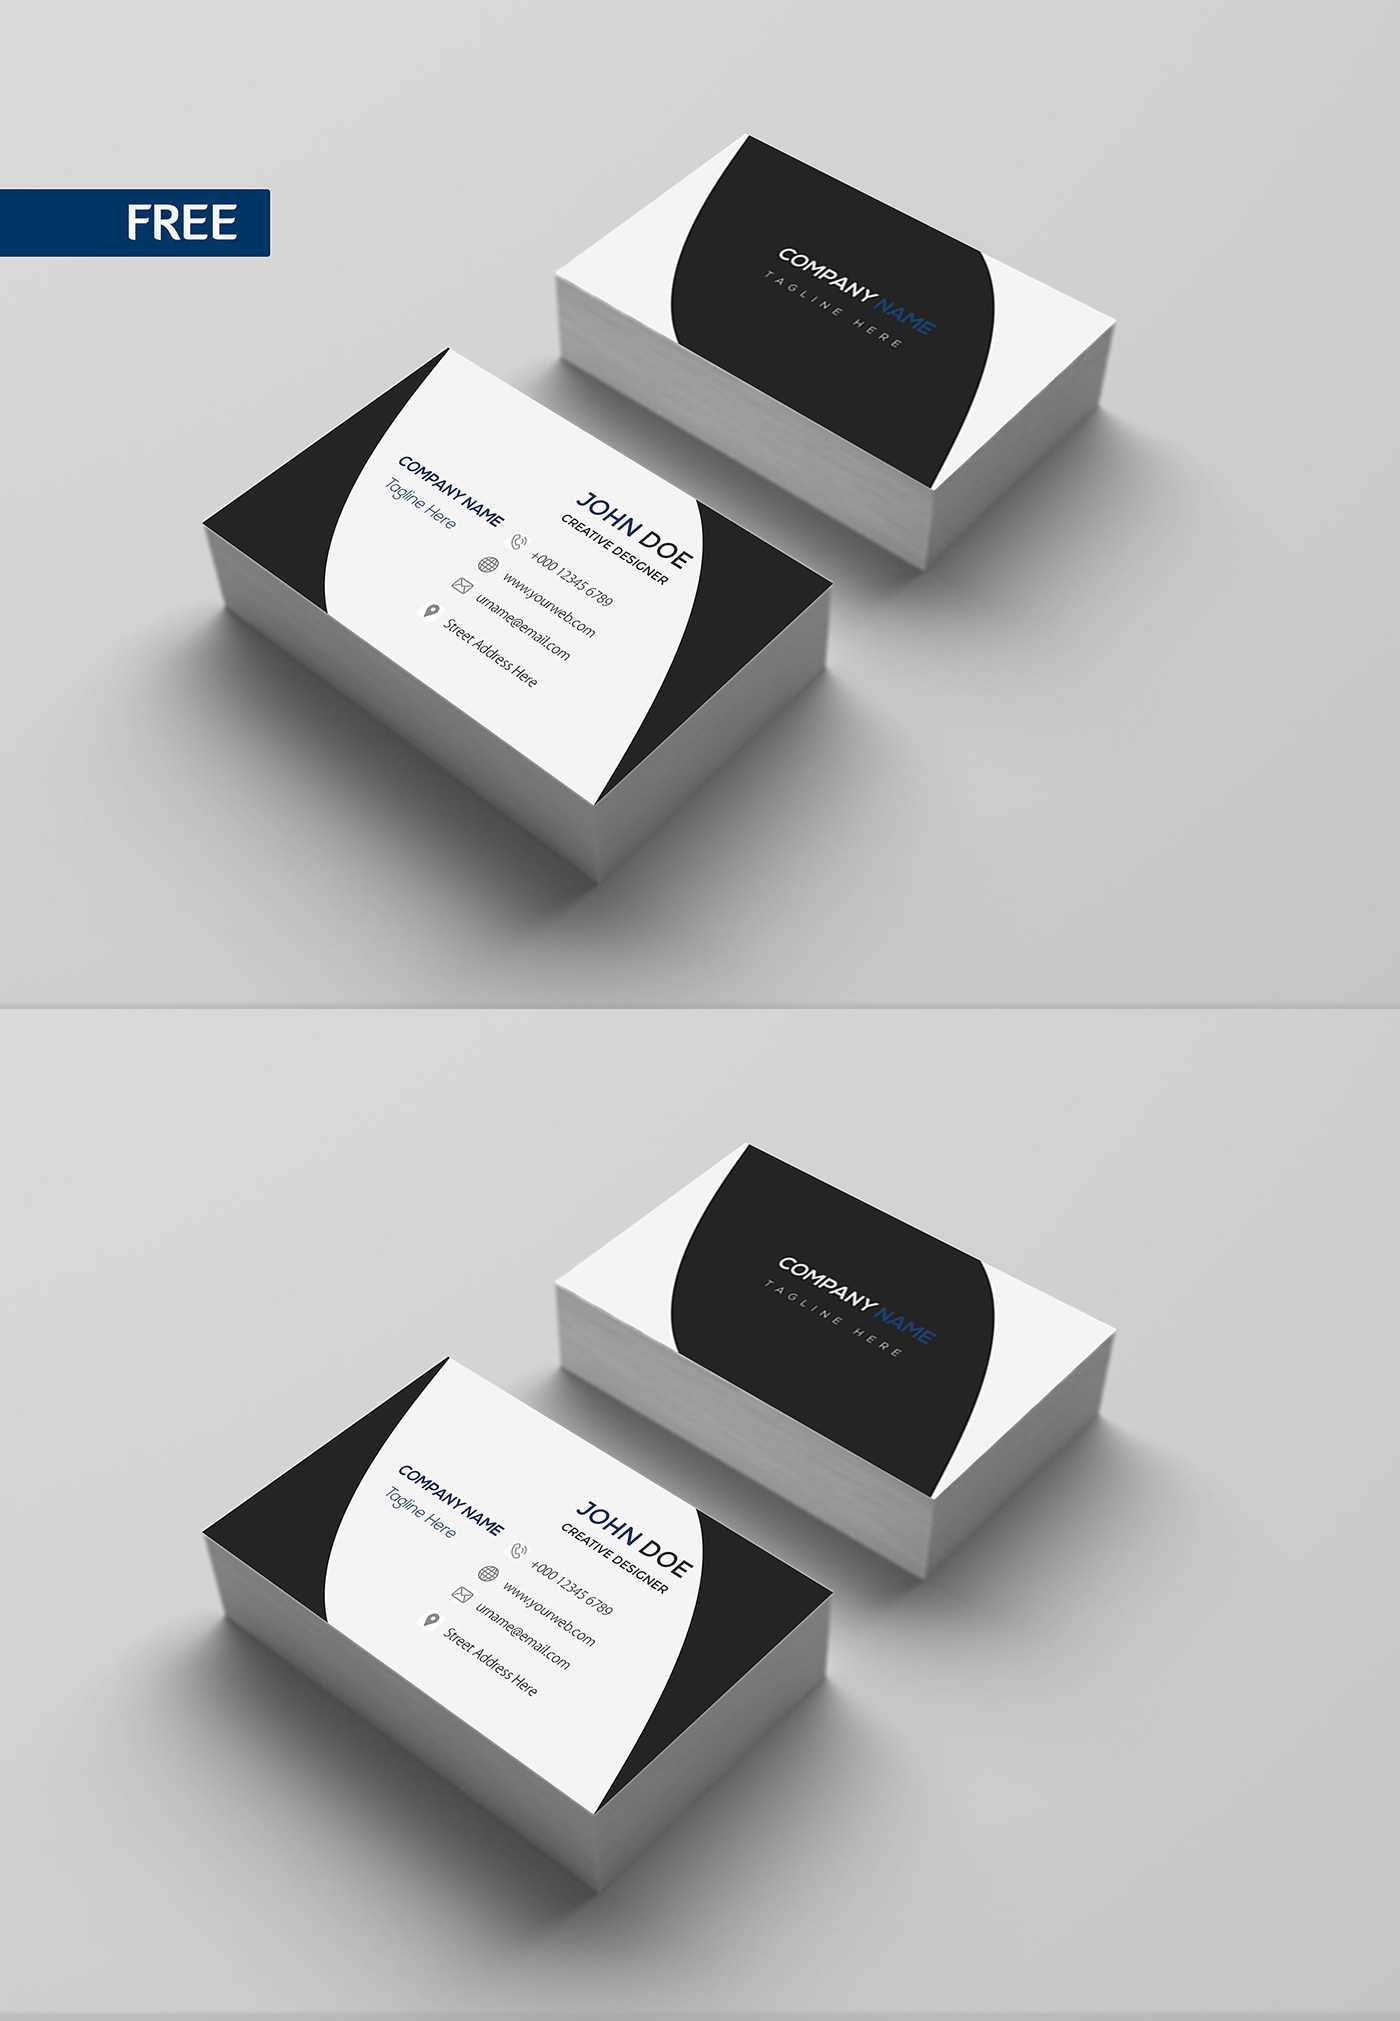 Free Print Design Business Card Template On Behance For Template For Cards To Print Free